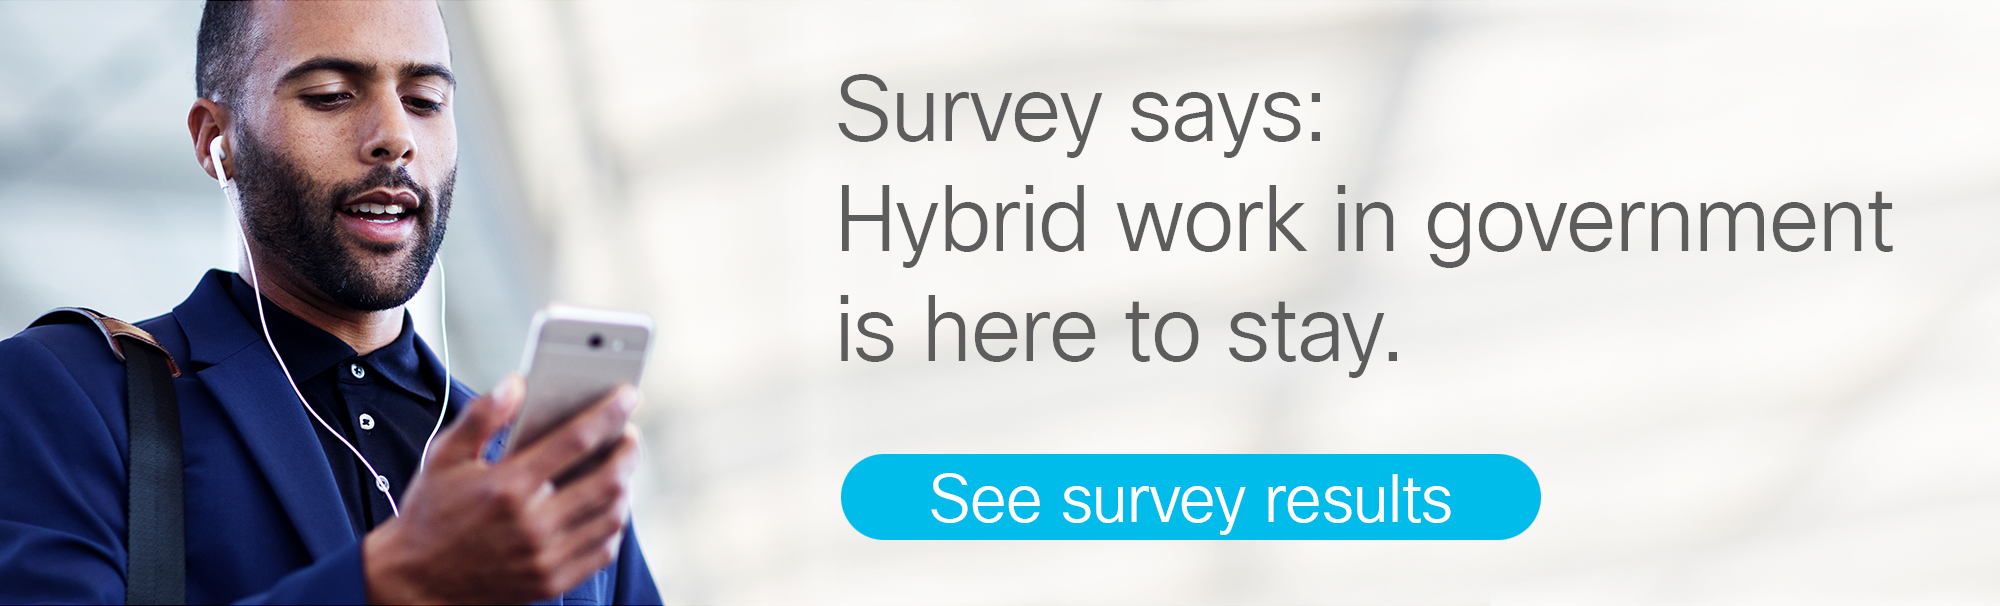 Hybrid work in government survey released